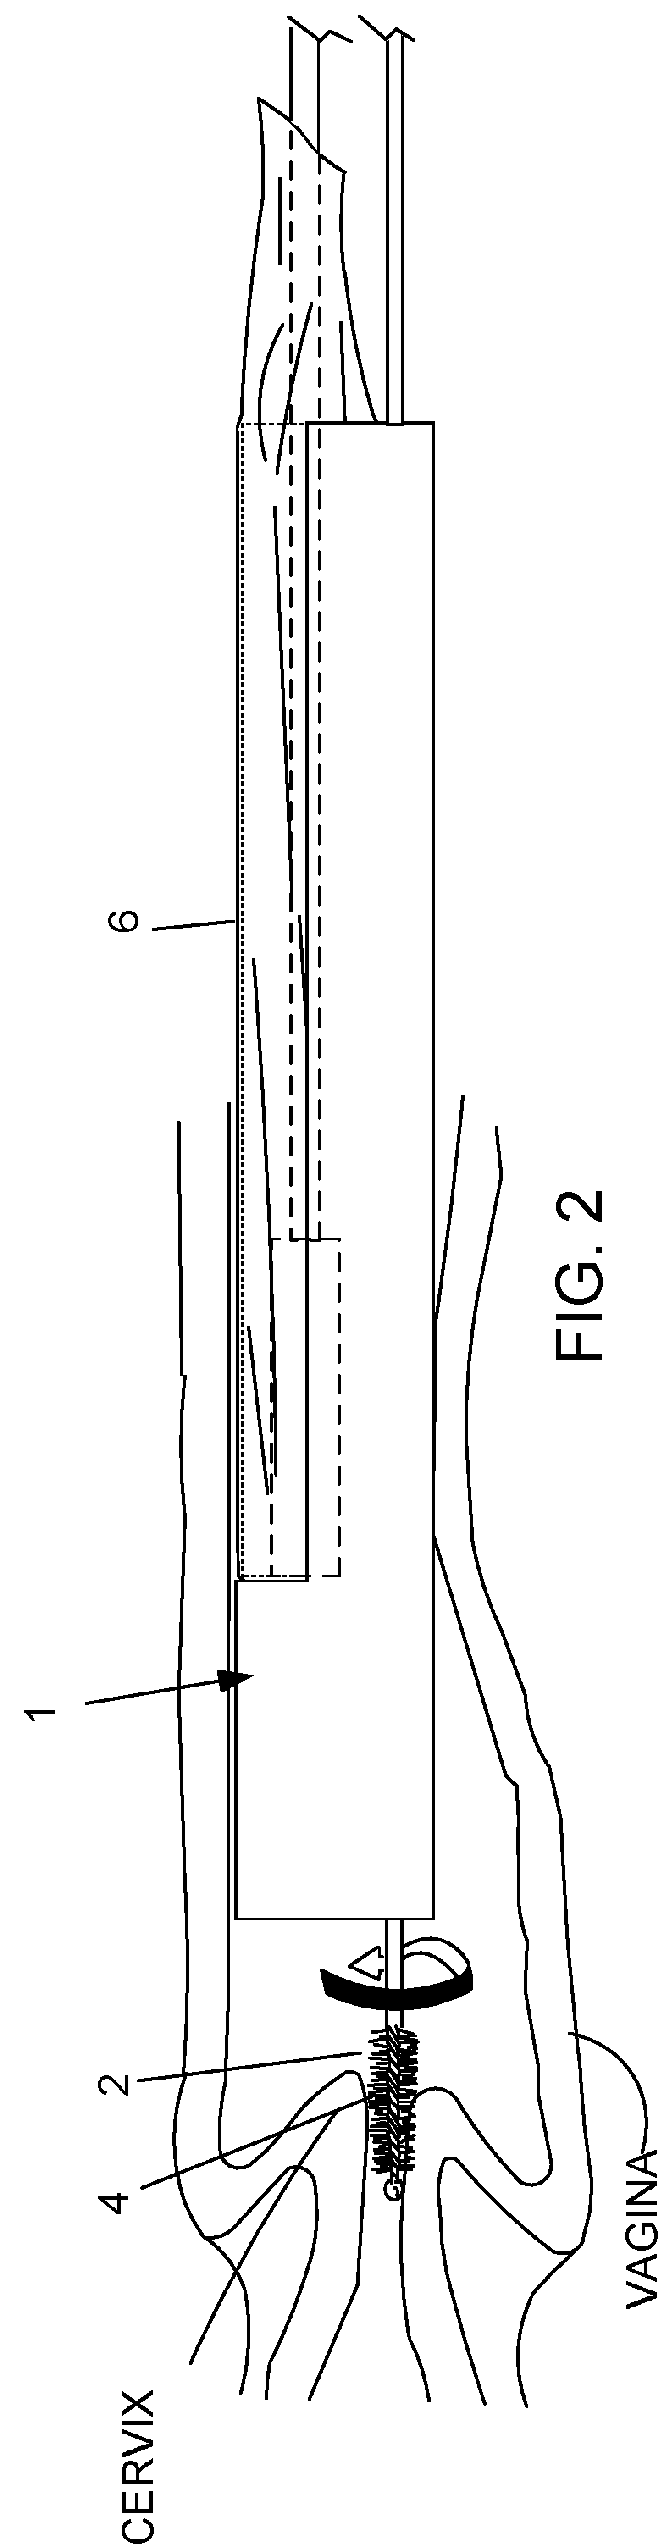 Device and method for conducting a pap smear test